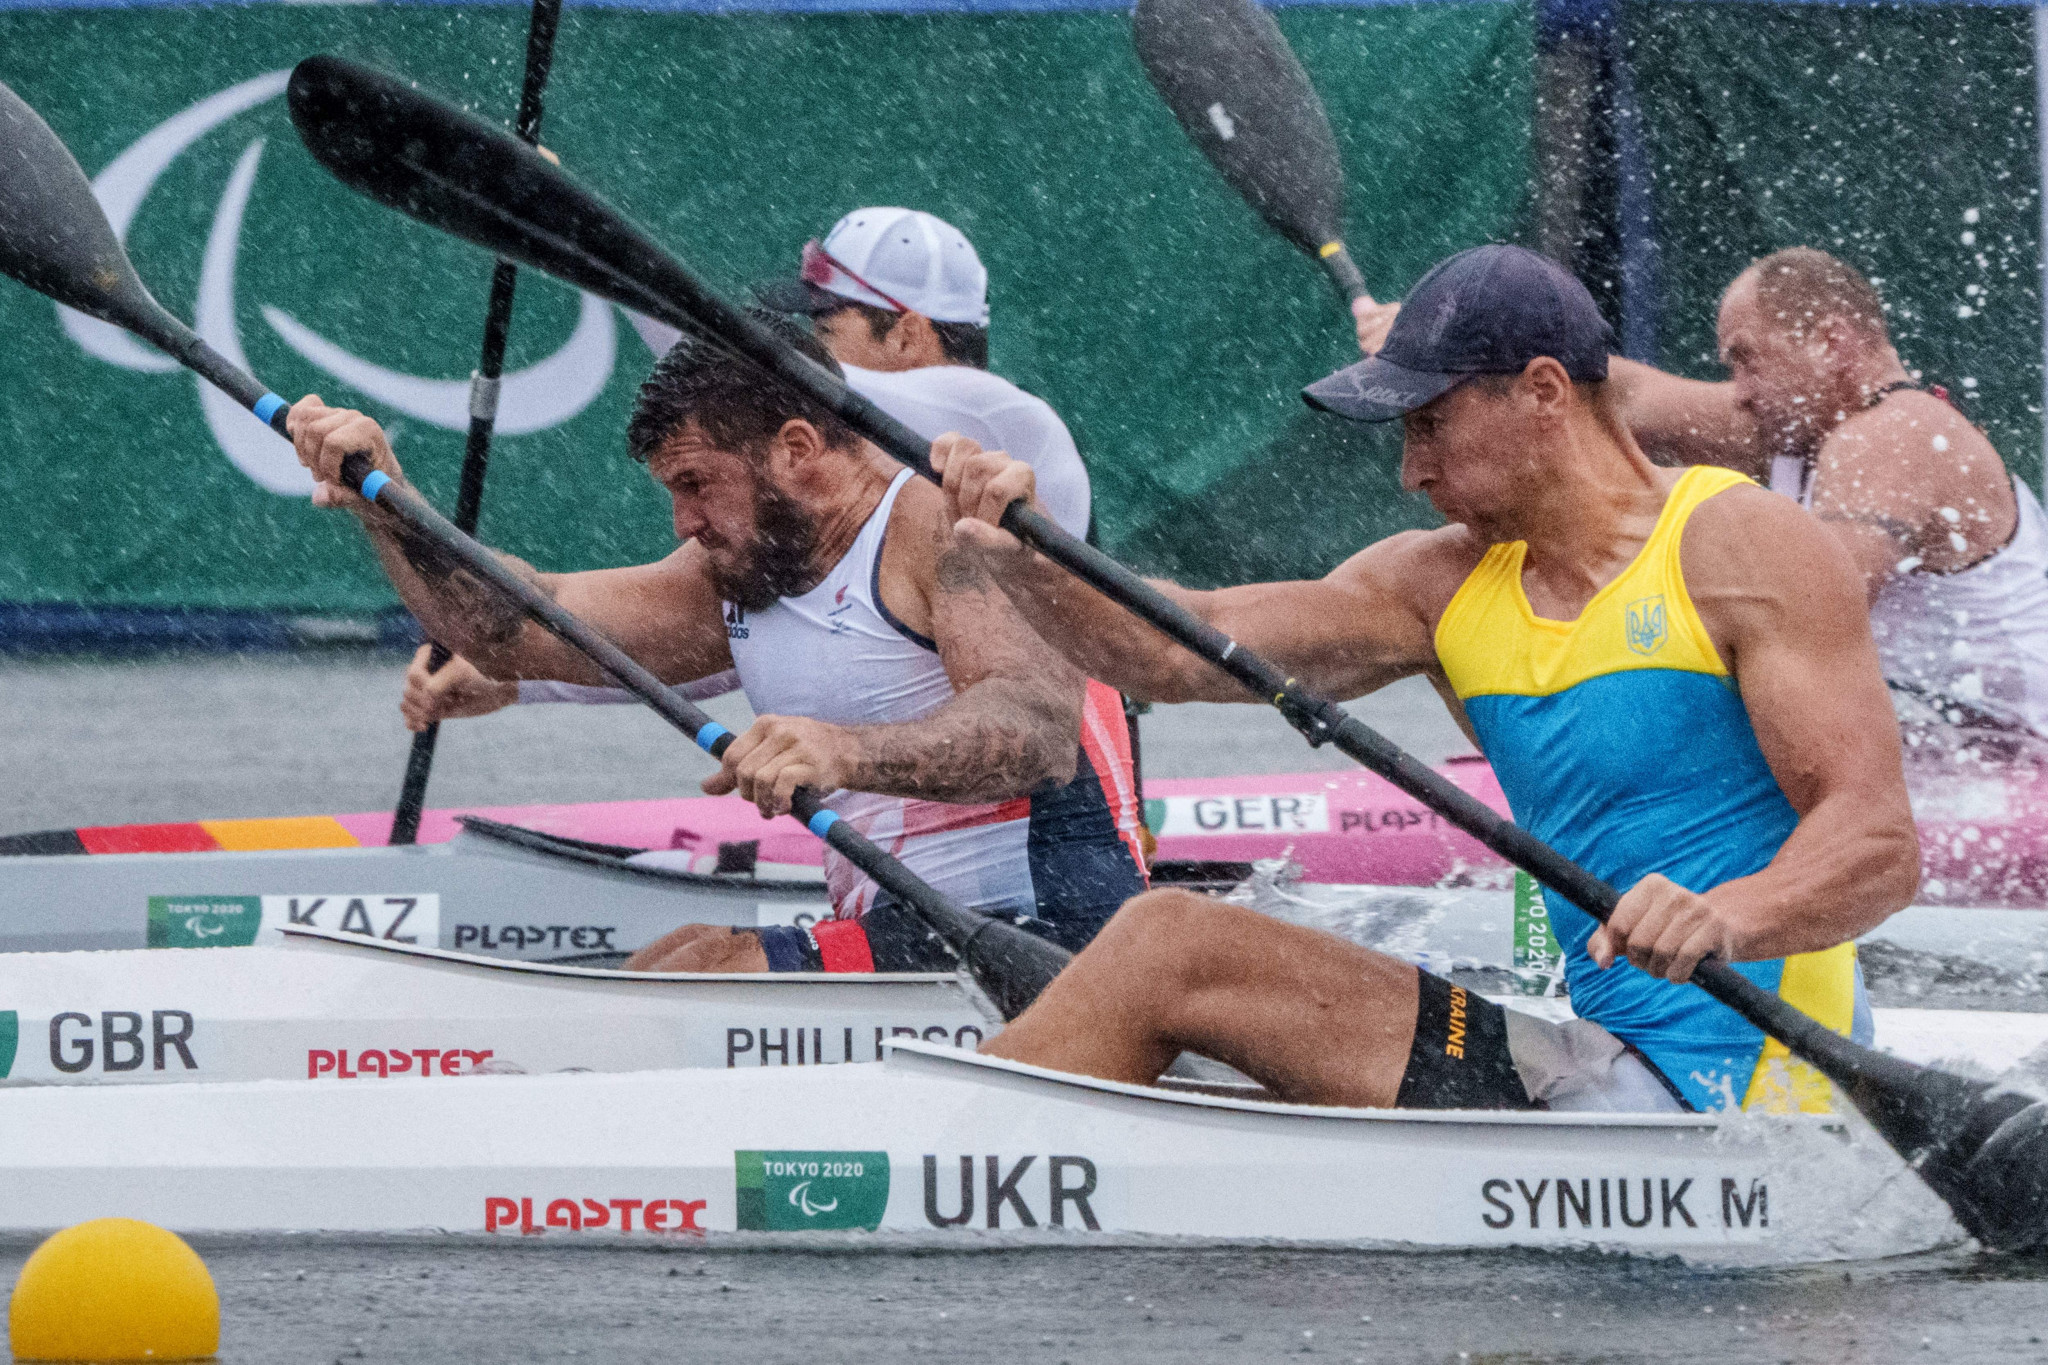 World champion Syniuk impresses on first day of ICF Paracanoe World Cup in Poznań